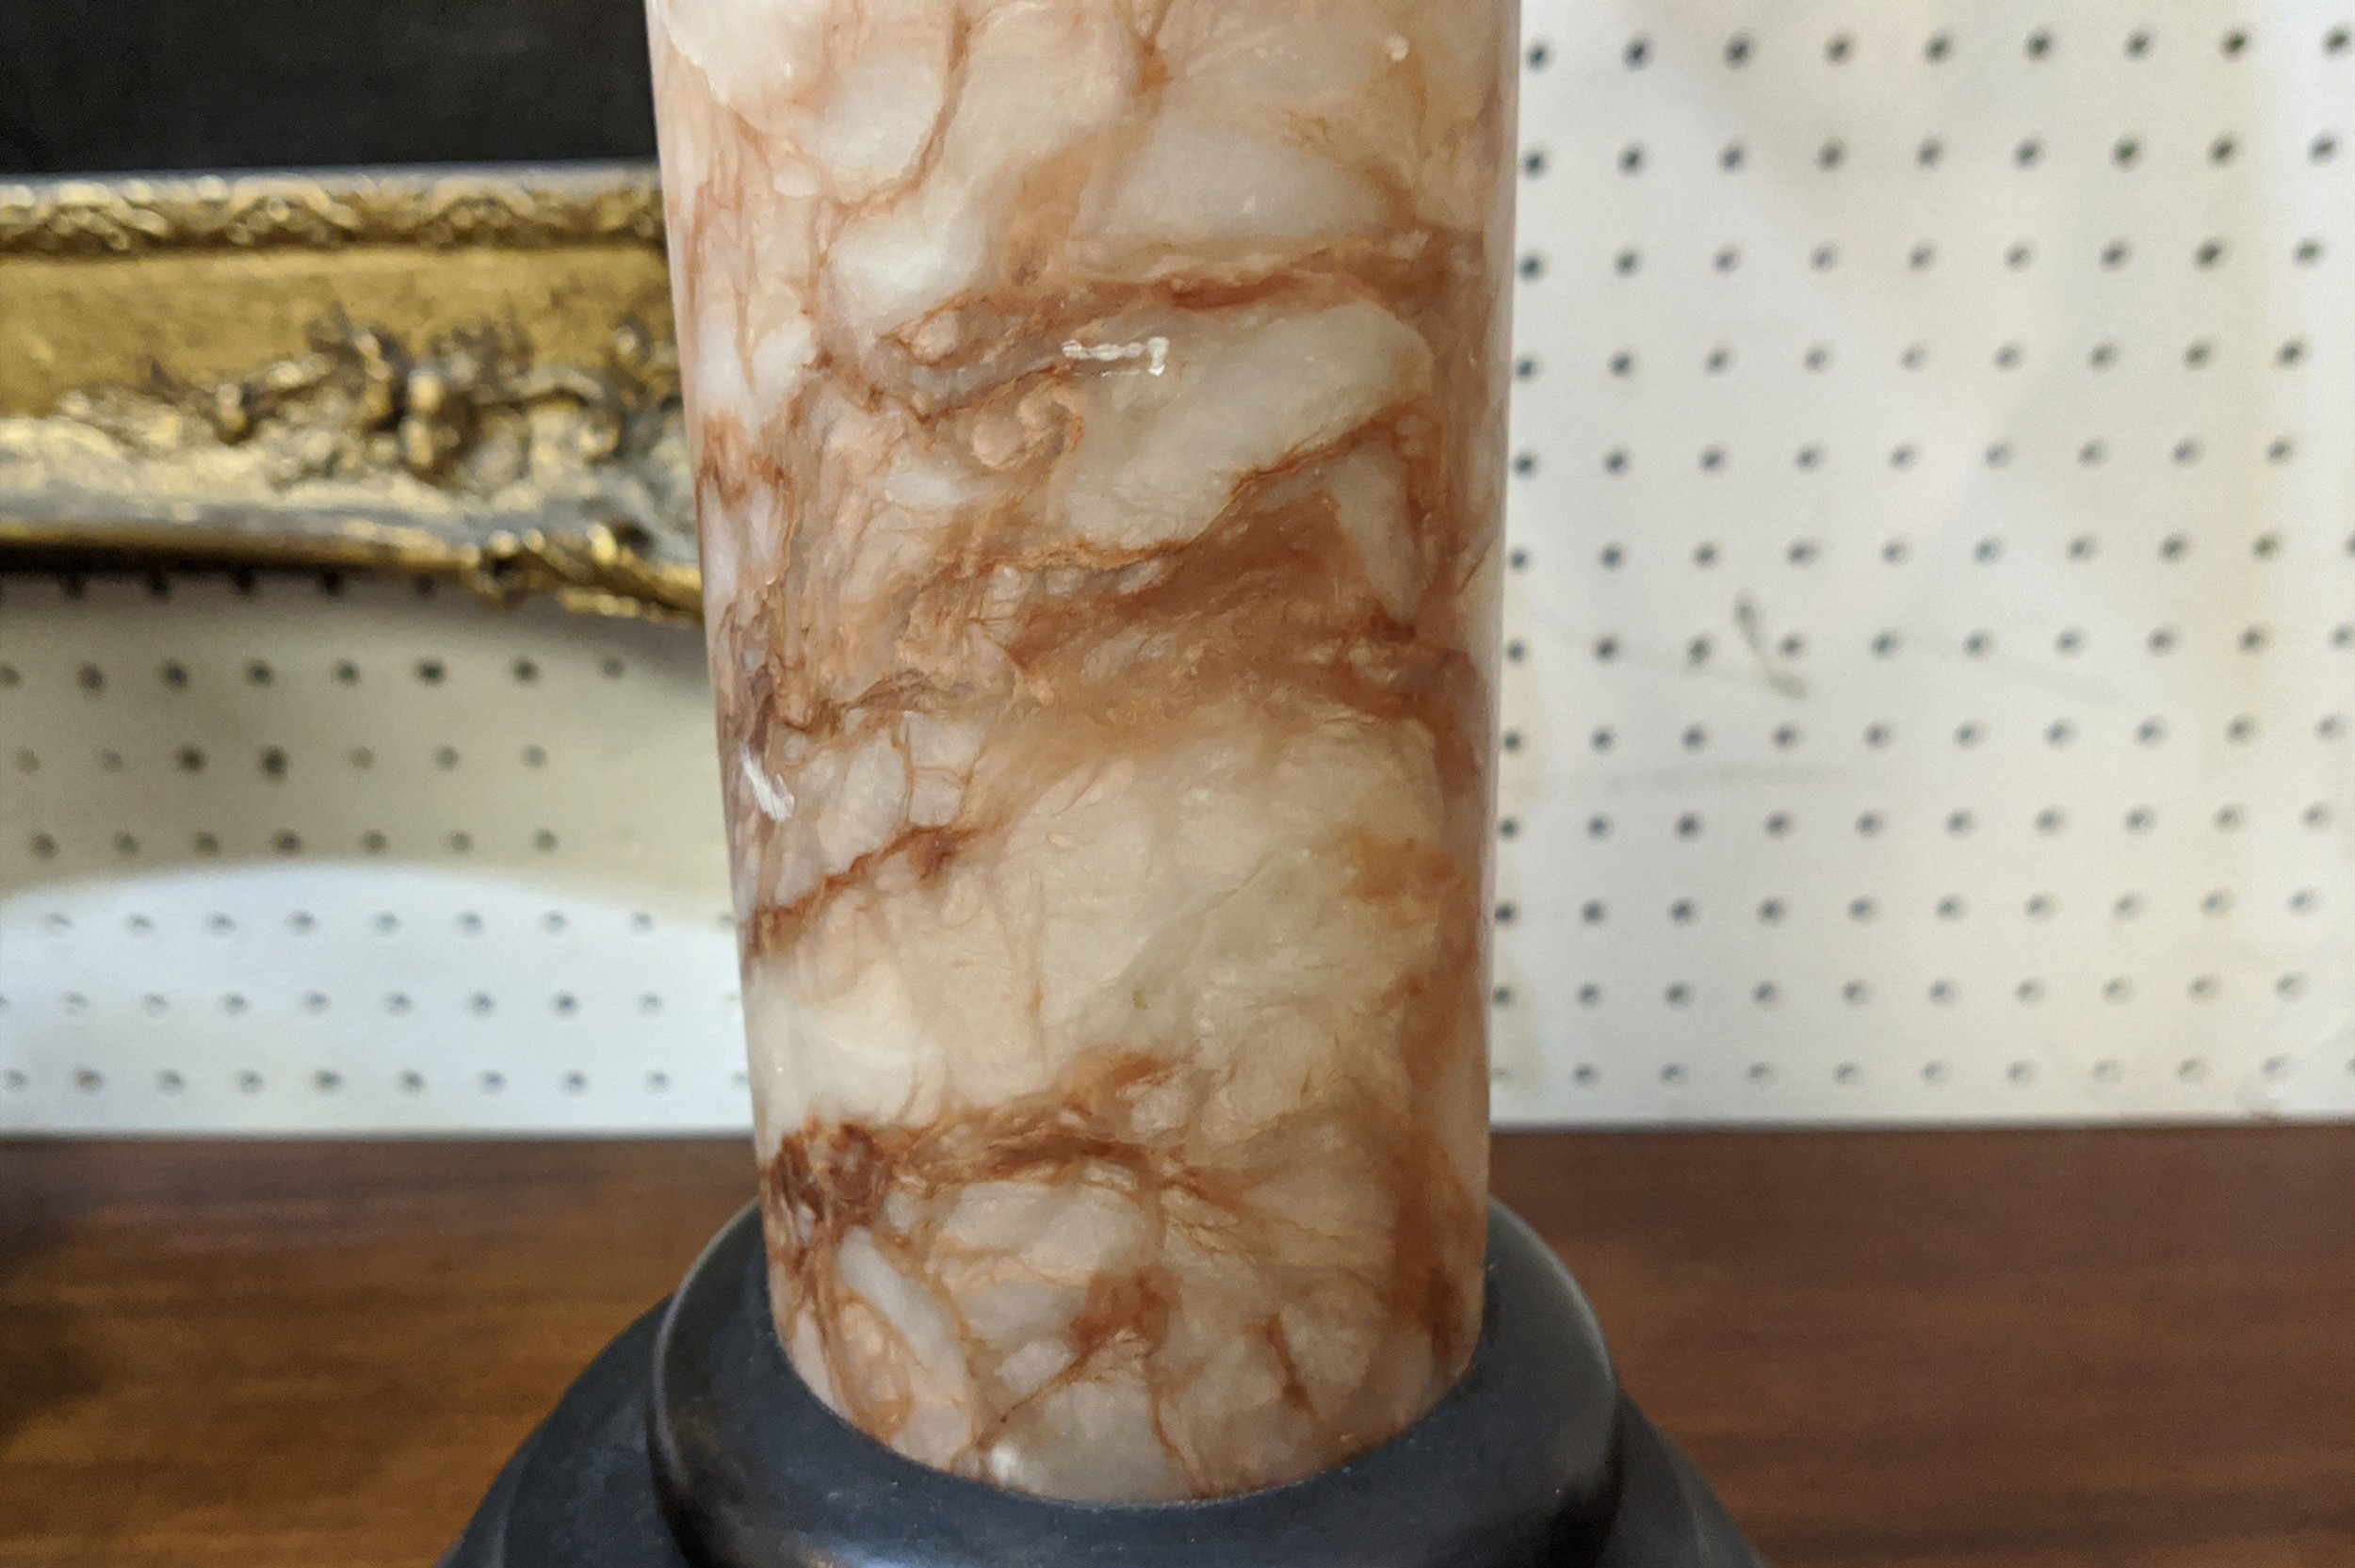 COLUMN LAMPS, a pair, circa 1920s, grand tour style alabaster column form with stepped bronze - Image 9 of 17